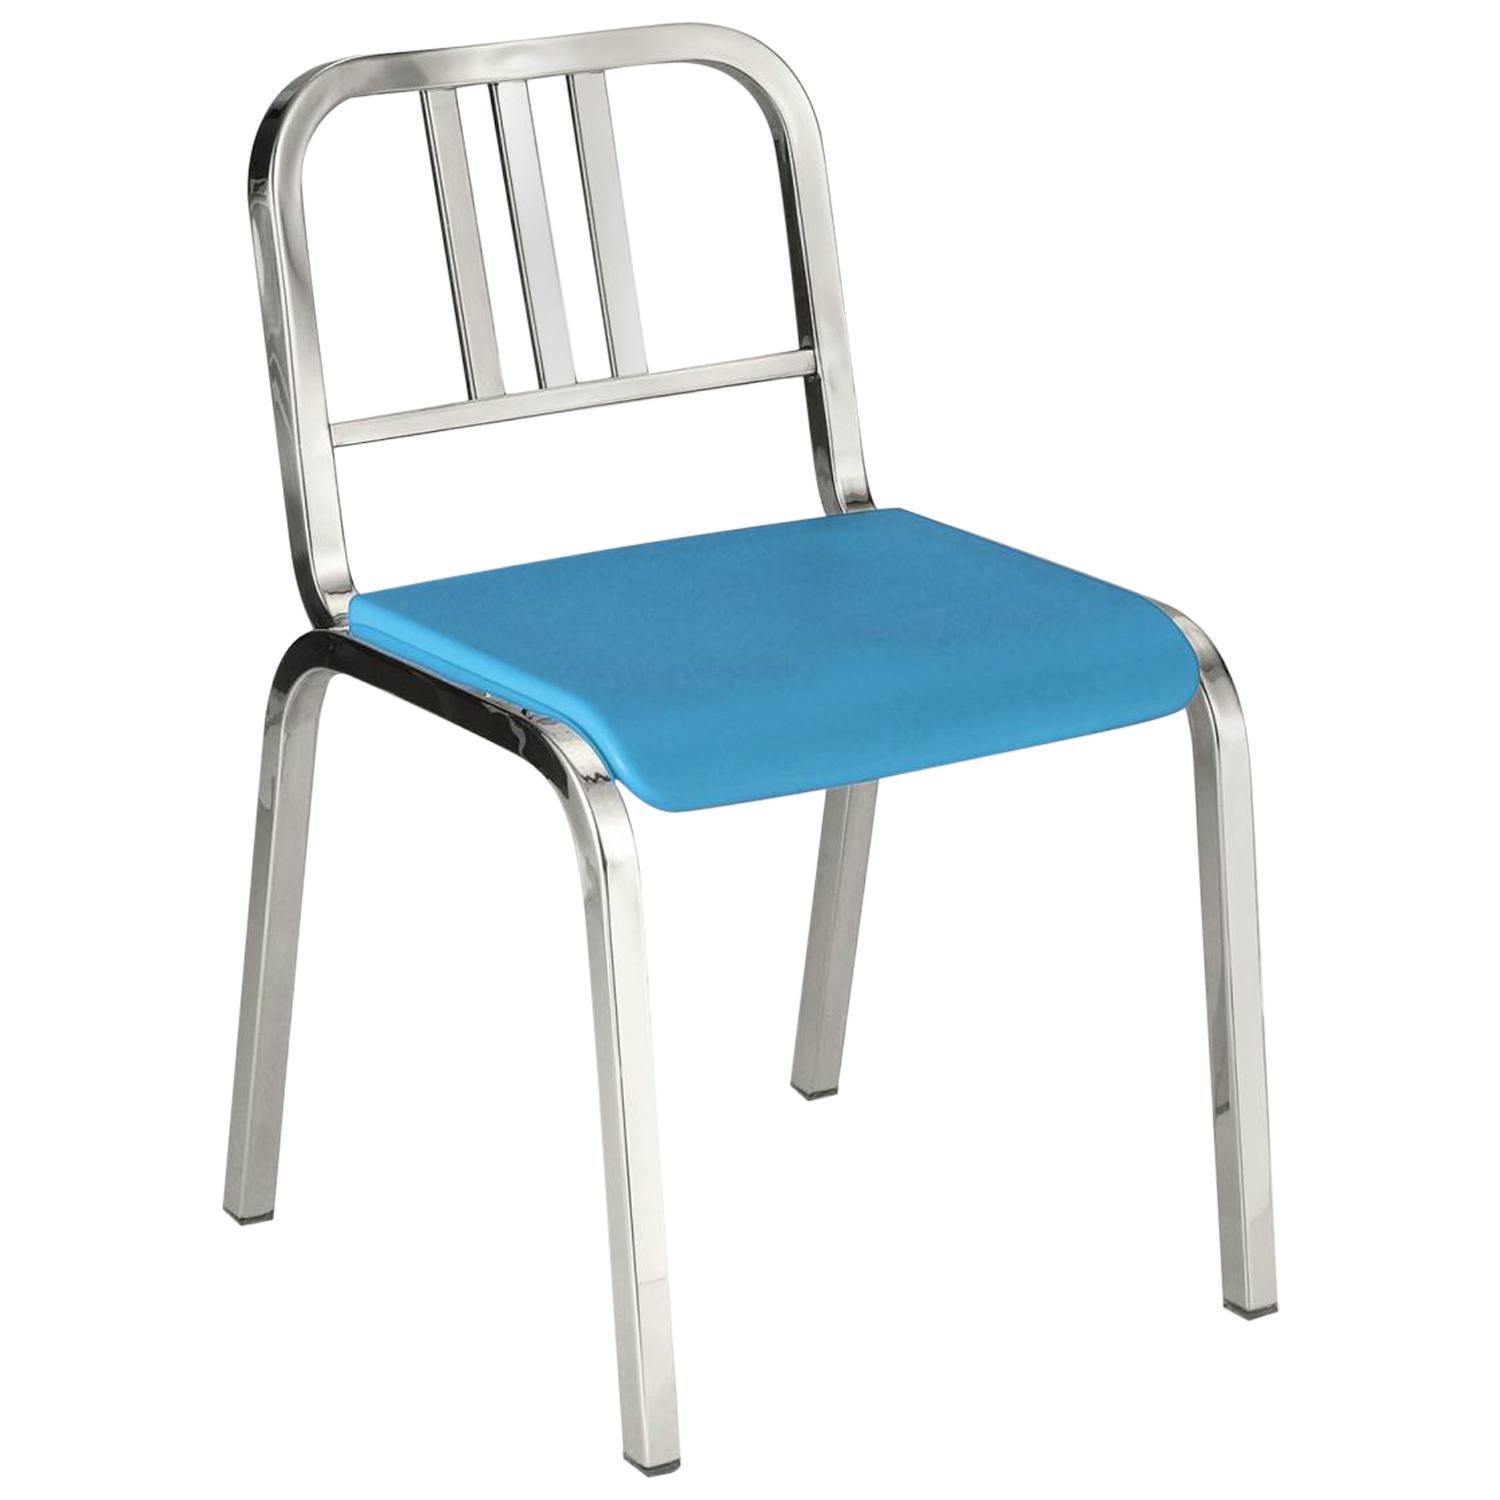 Emeco Nine-0 Chair in Polished Aluminum with Blue Seat by Ettore Sottsass